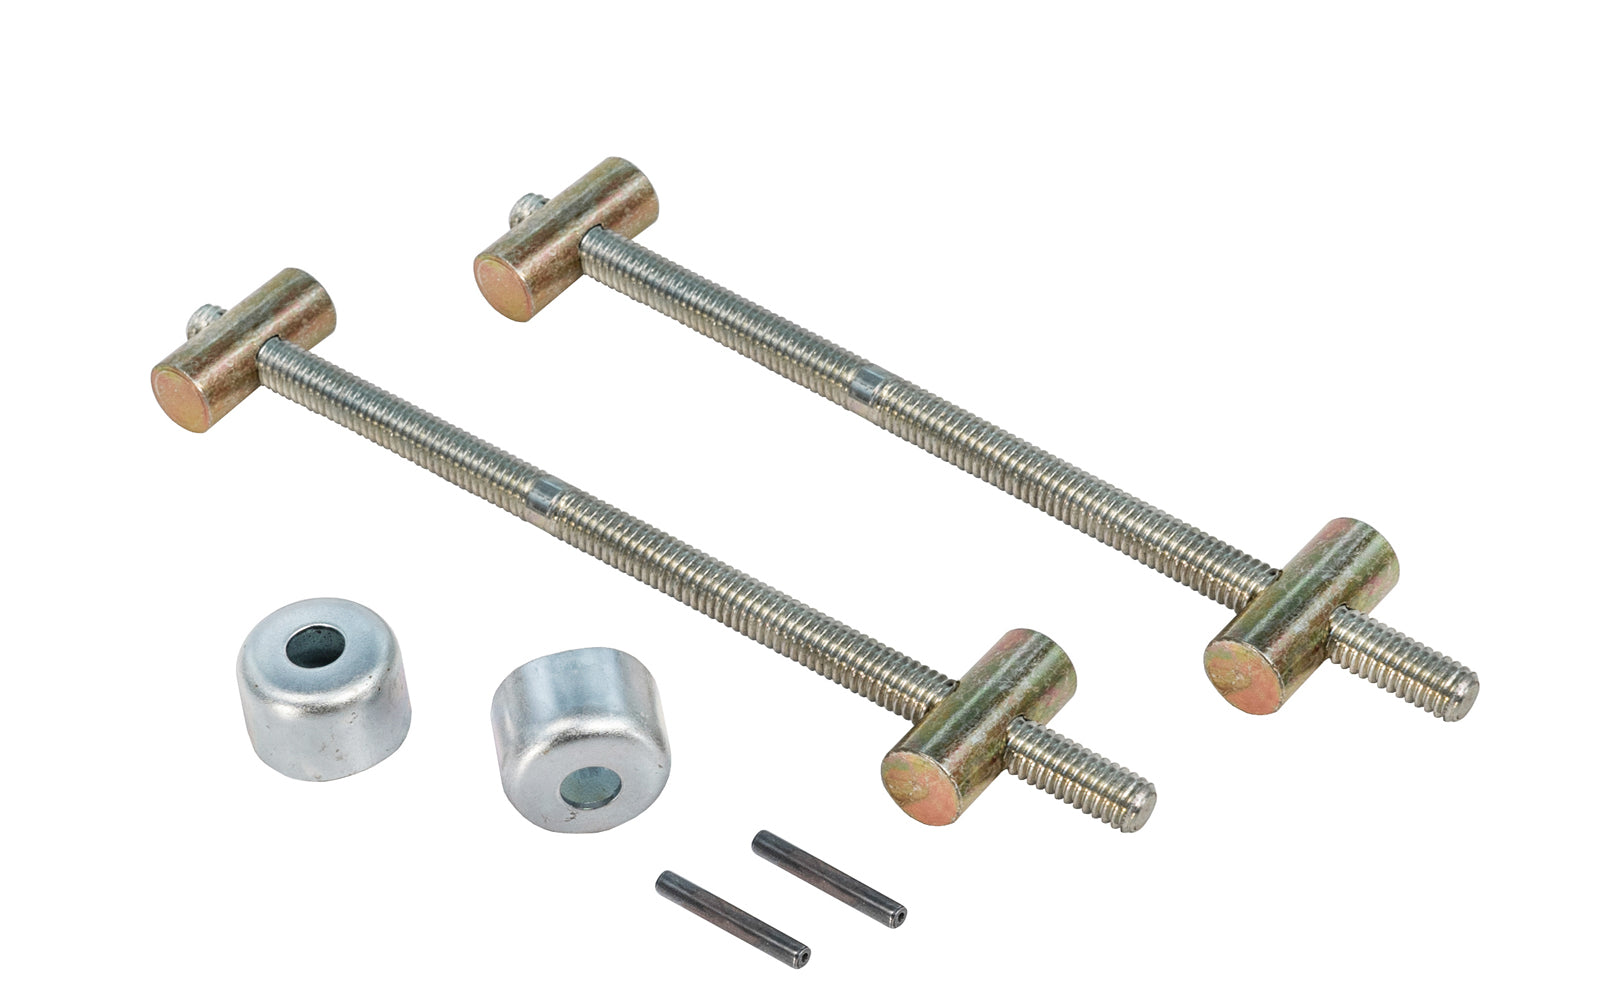 Build your own adjustable handscrew clamp with this kit. This kit is designed for 10" Jaw Length Handscrew Clamps. Spindles & swivel nuts are of cold drawn carbon steel & the threads have double leads for rapid operation & close tolerances. All metal parts are treated to prevent rust. Made in USA. 099687001004